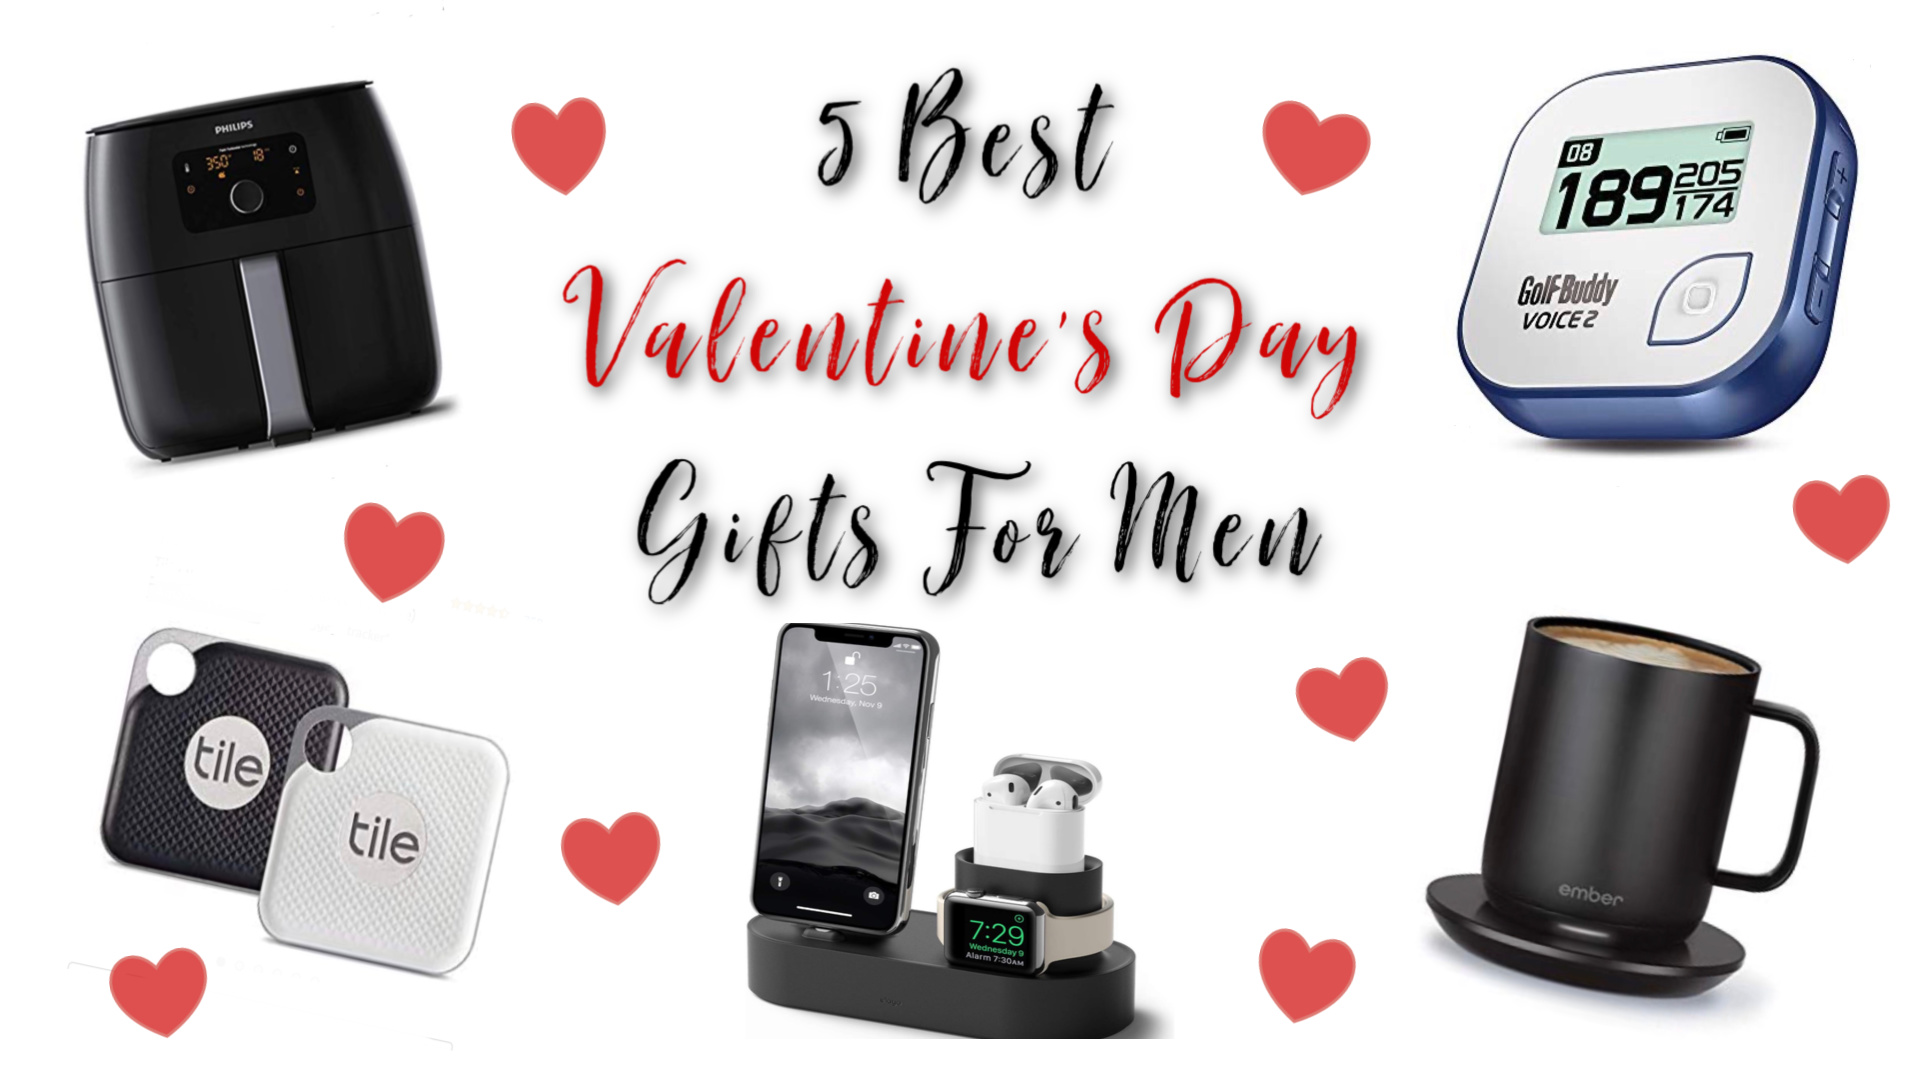 The Best Valentines Day Gifts For Men